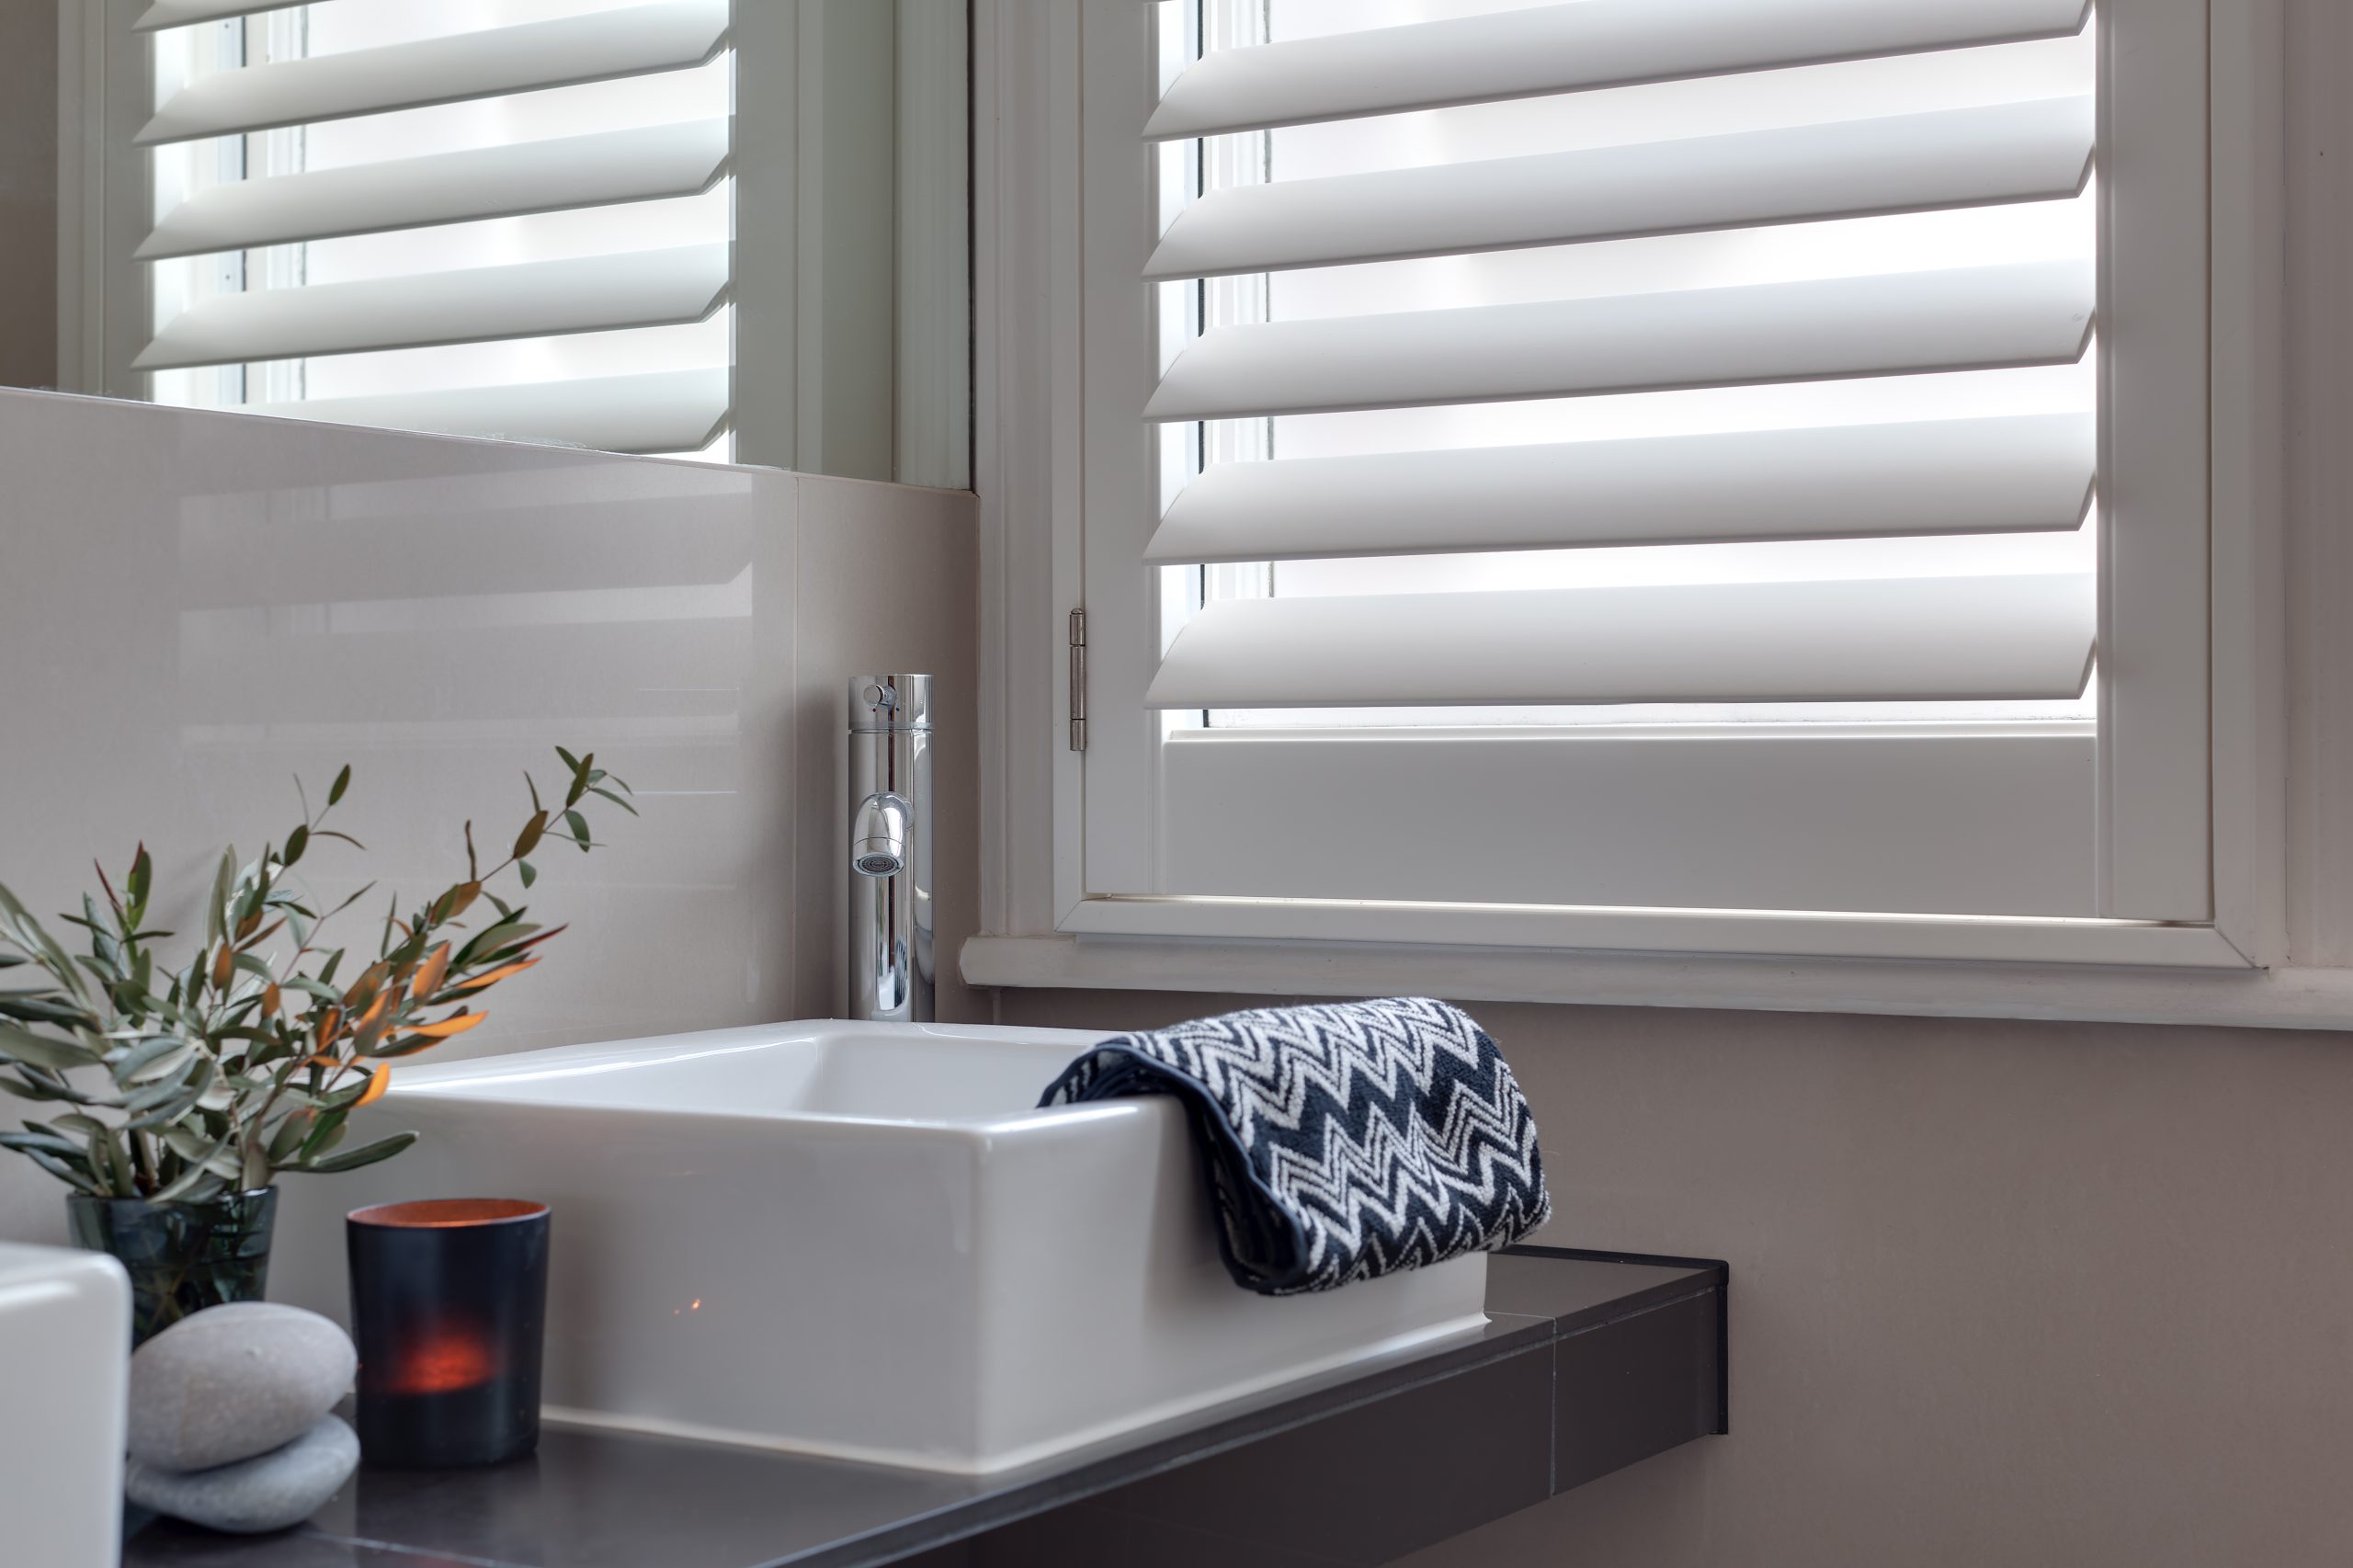 Bathroom detail with Salcombe waterproof shutters and a white sink.